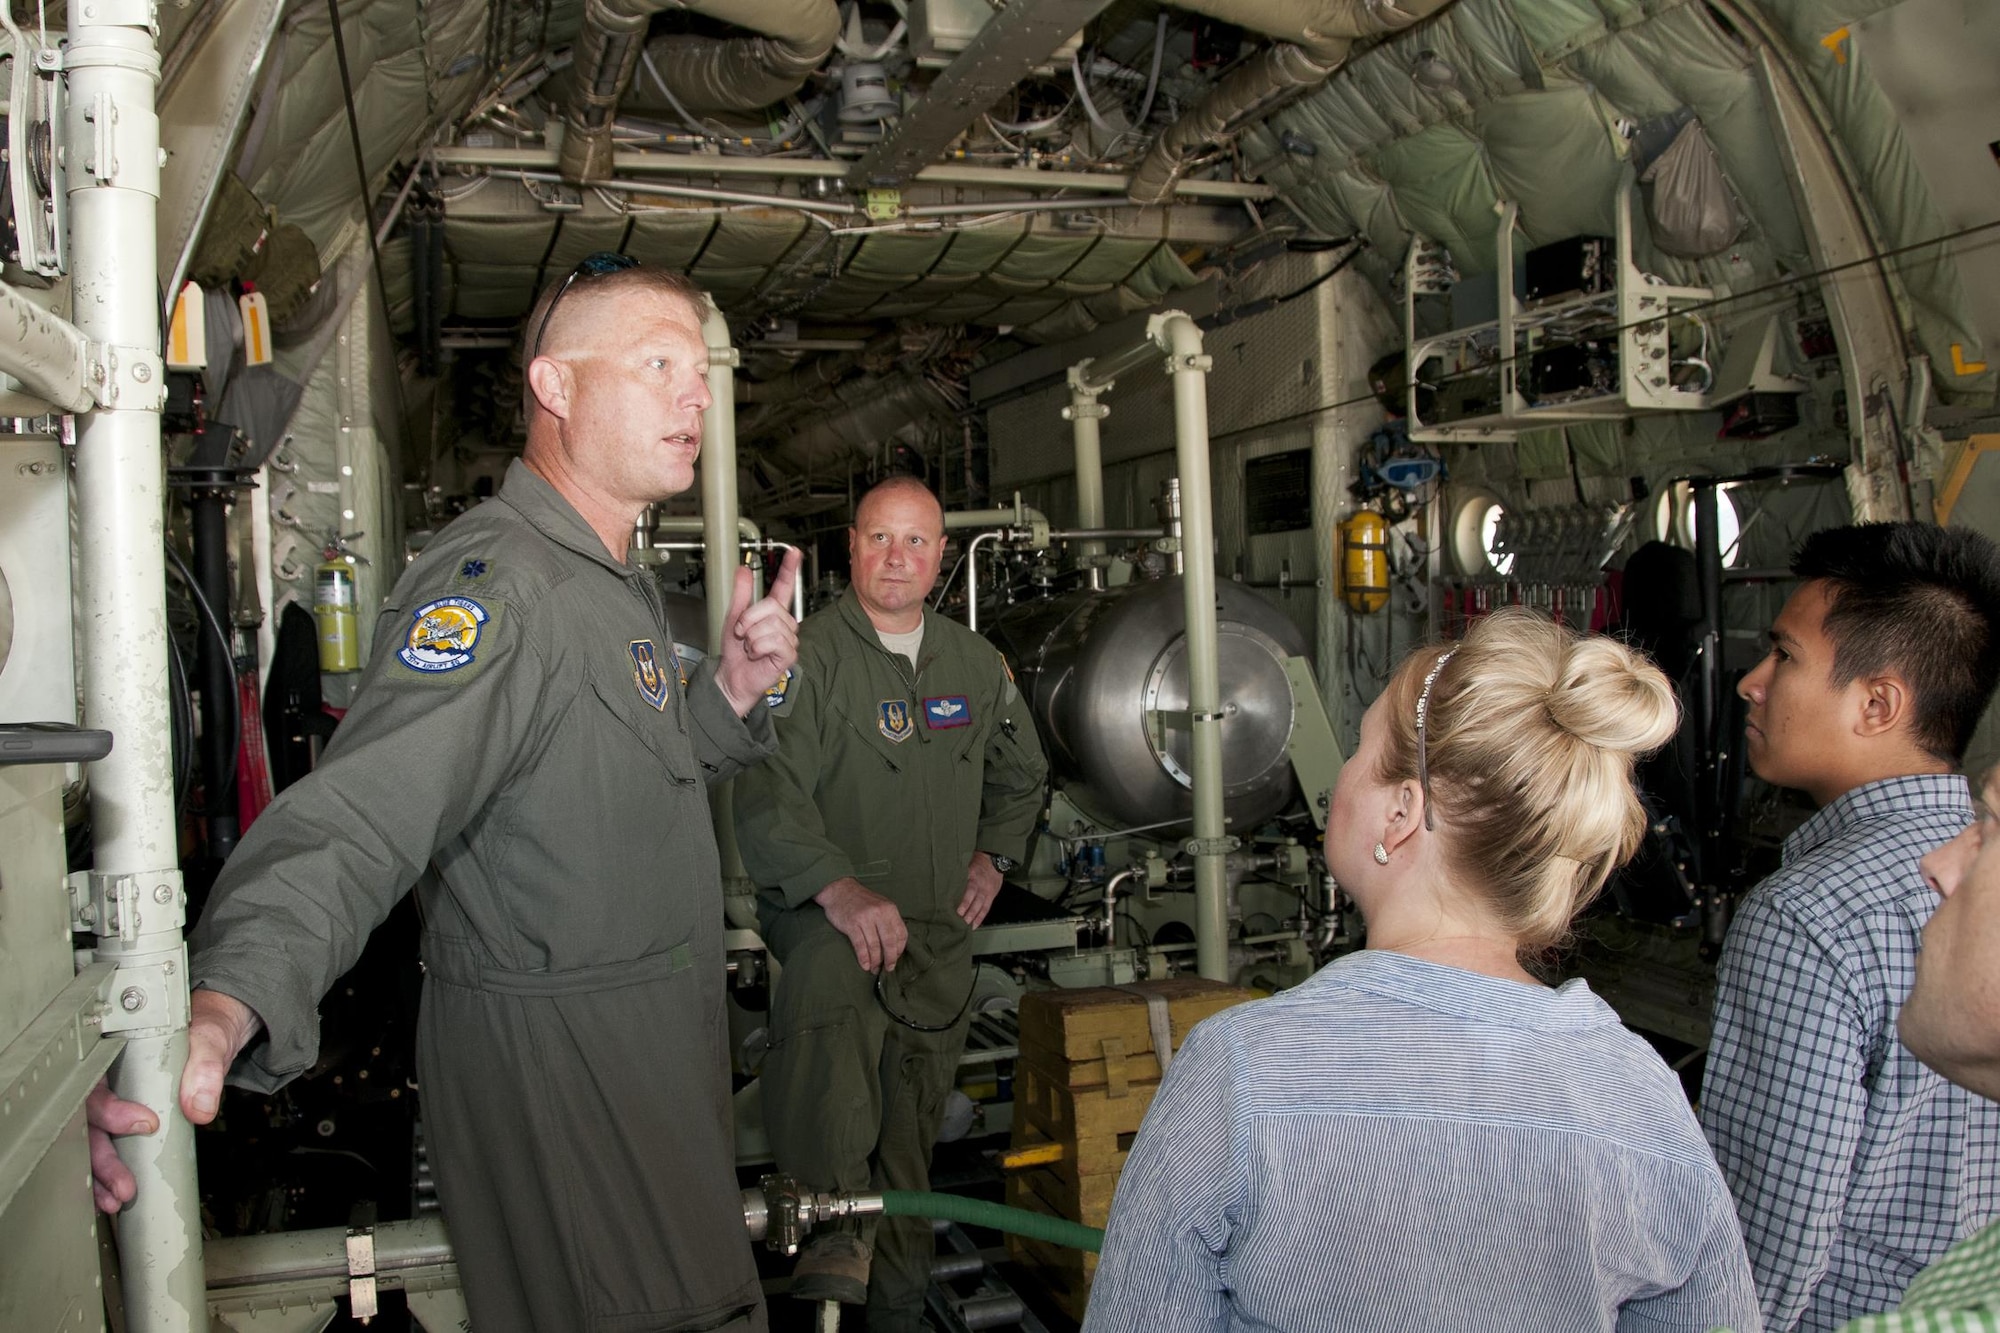 Lieutenant Col. Karl Haagsma, 757th Airlift Squadron medical entomologist, discusses his unit’s mission with congressional staff members on the Joint Base Andrews, Md., flight line June 28, 2016. In honor of the 100th anniversary of air reserve power, members of the 53d WRS visited Andrews to participate in a C-130 Hercules special-missions demonstration. The 757th AS has the specialized mission of aerial spray capability to control disease-carrying insects, pest insects, undesirable vegetation and to disperse oil spills in large bodies of water. (U.S. Air Force photo/Staff Sgt. Kat Justen) 